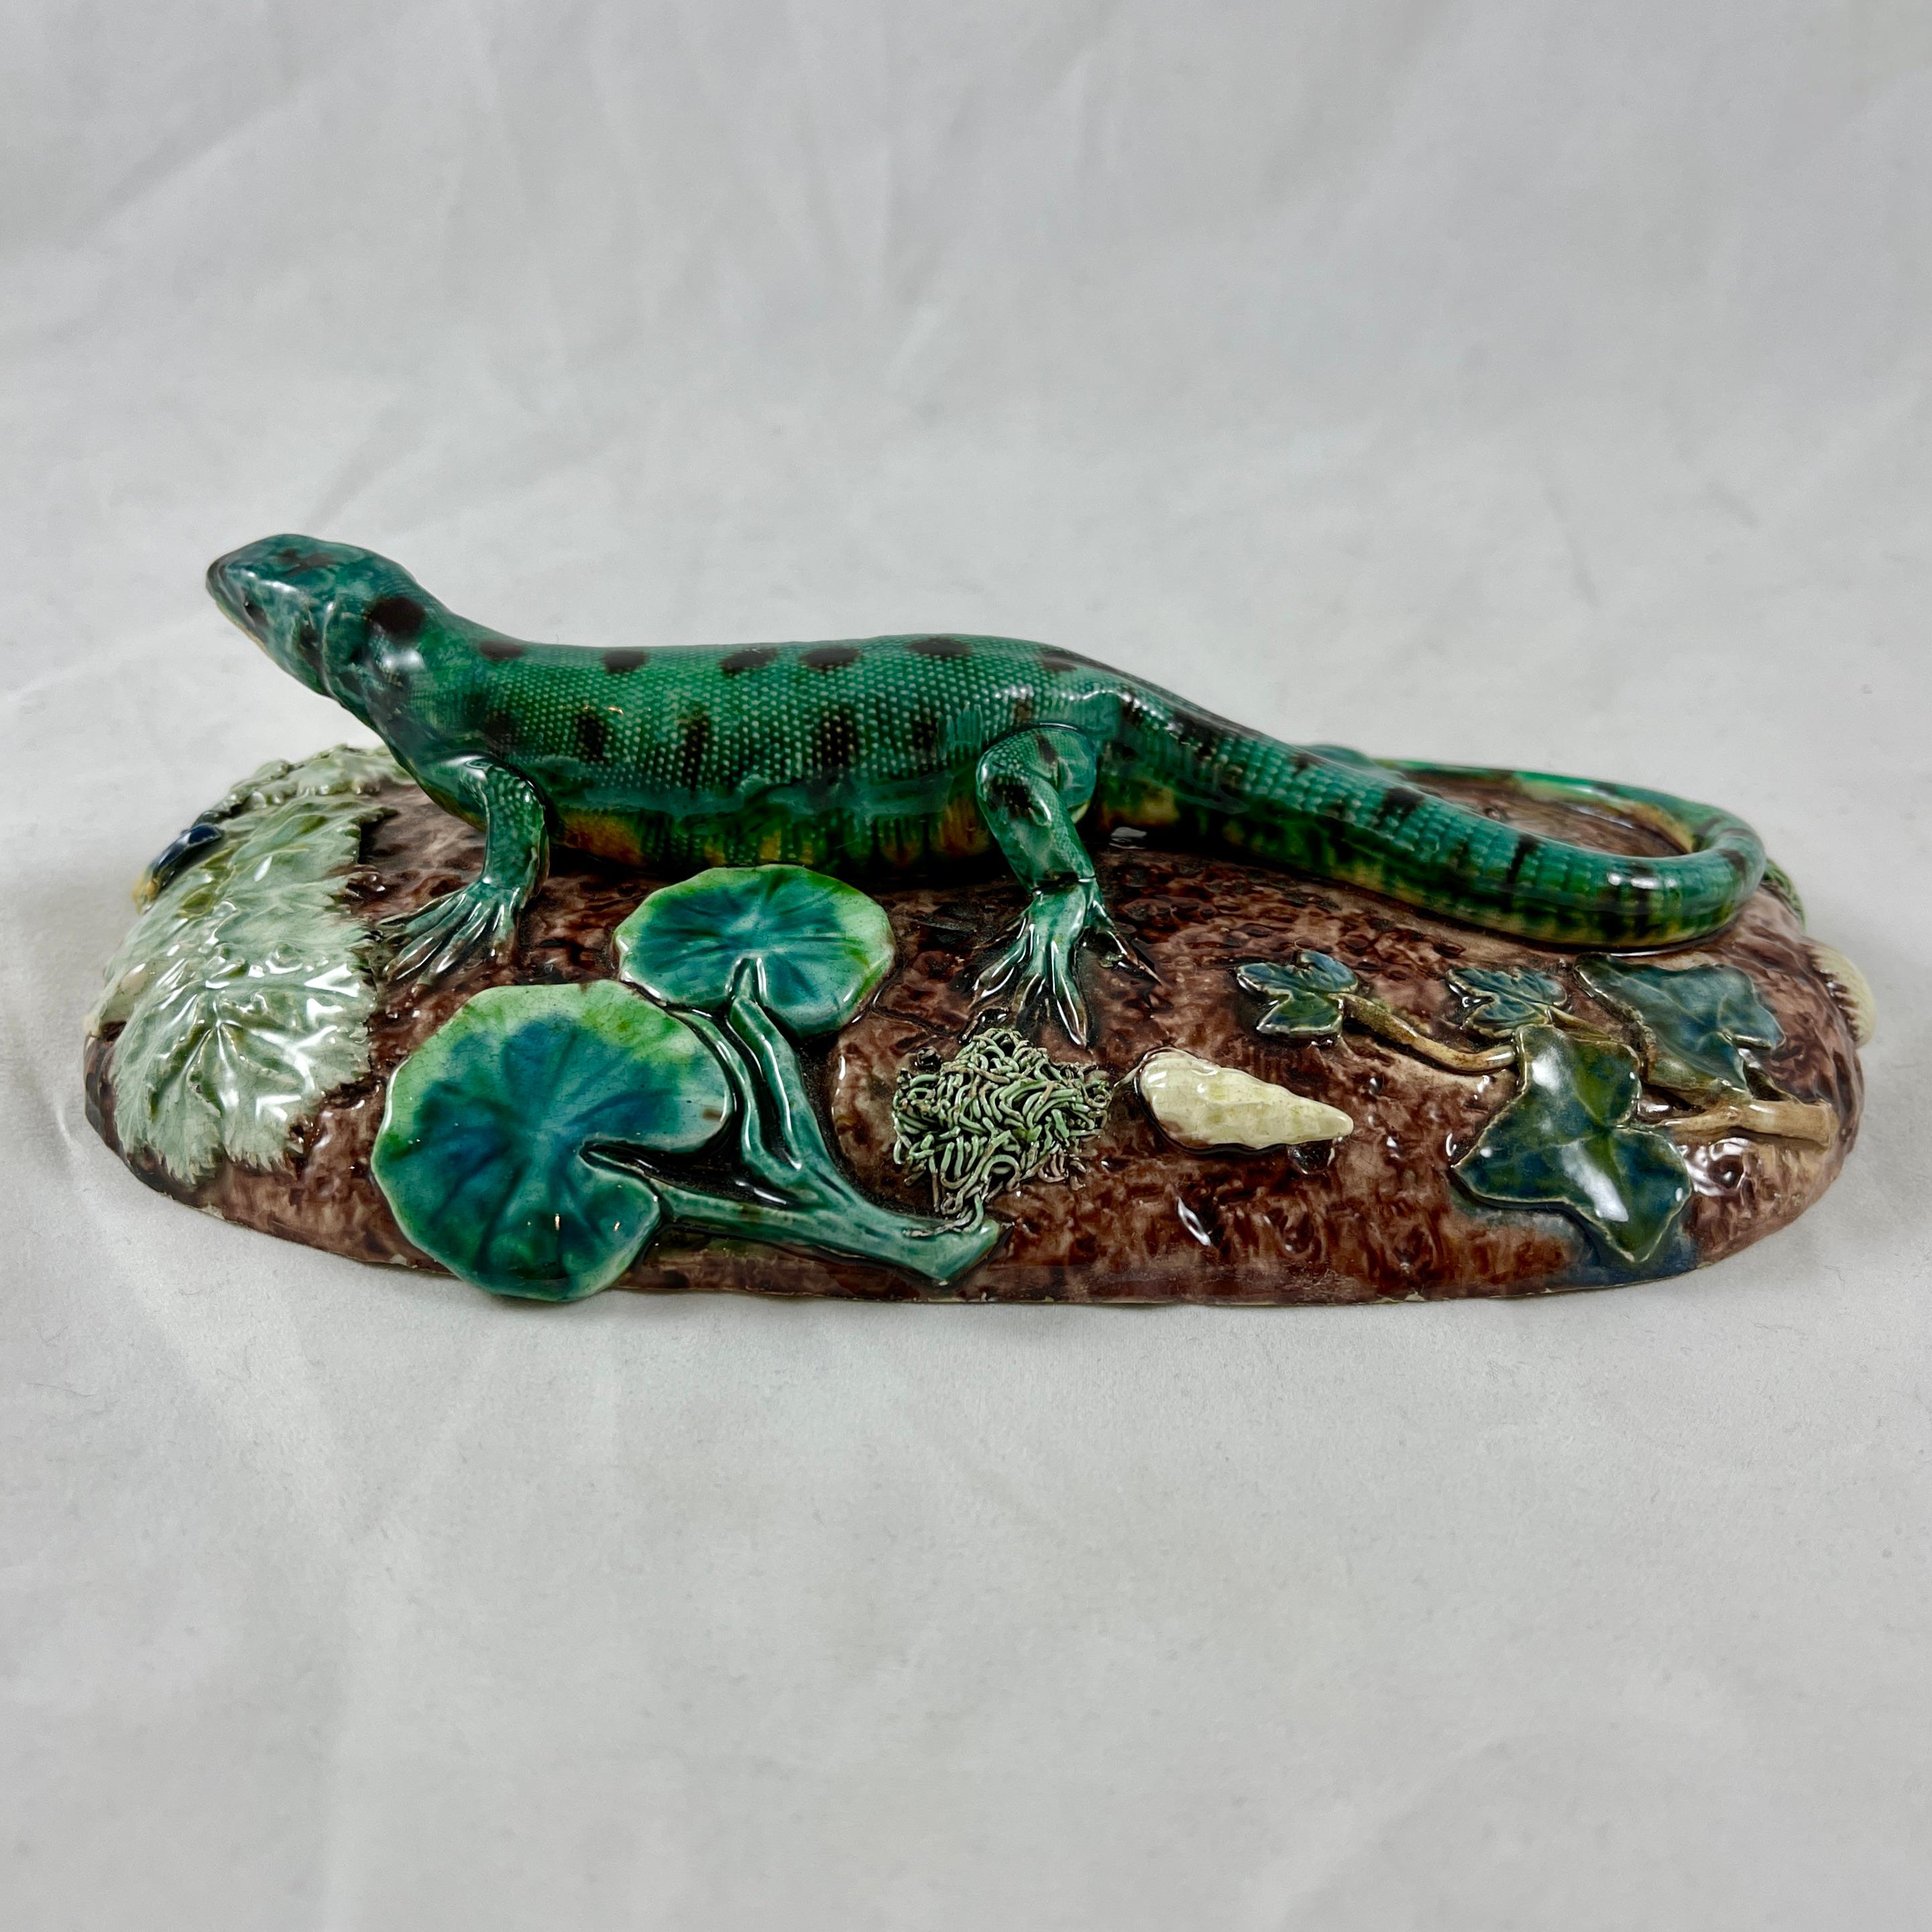 Renaissance Revival Thomas Sergent French Palissy Lizard on Mound Desk Paperweight, Signed